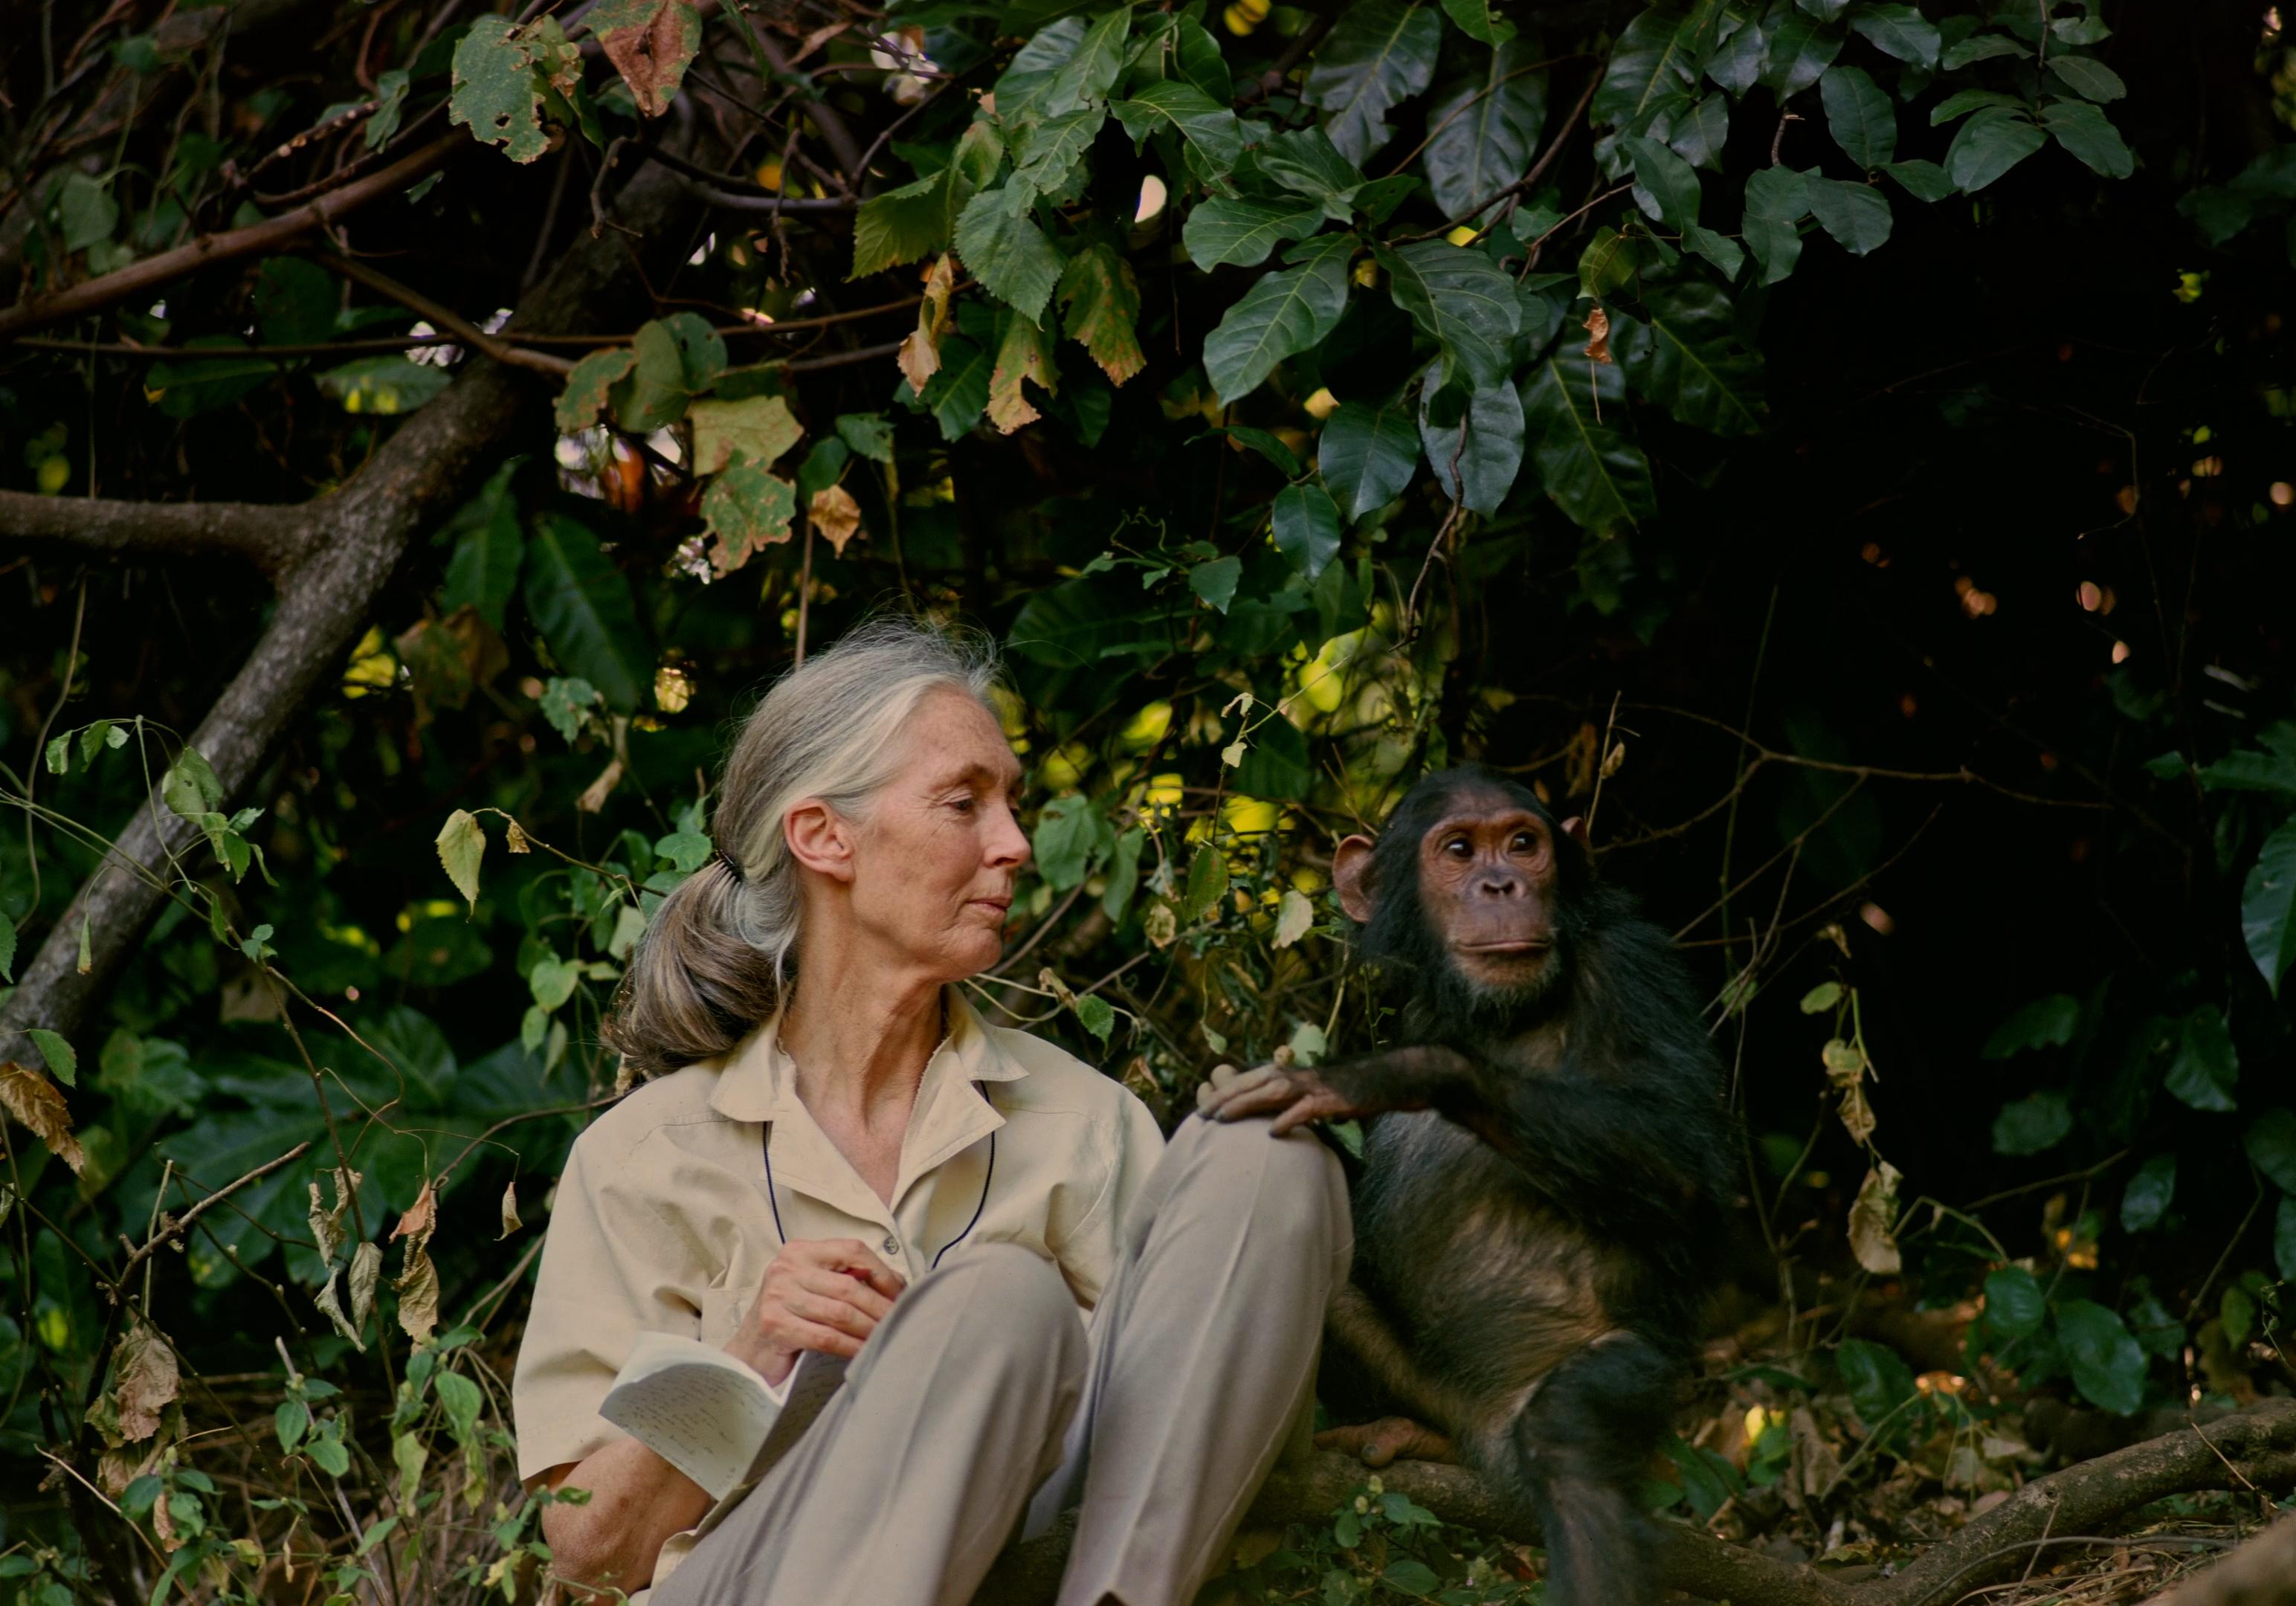 The Hong Kong Space Museum will launch a new dome show, "Jane Goodall - Reasons for Hope", at its Space Theatre from July 1 (Monday), allowing audiences to follow Dr Goodall's research and her ecosystem conservation efforts in locations such as Canada, the United States, Europe and Africa. It aims to raise audiences' awareness of natural ecology conservation and inspire them to contribute to the maintenance of Earth's ecology. Picture shows Dr Goodall studying chimpanzees in the Gombe area in Africa. (Source of photo: Science North)